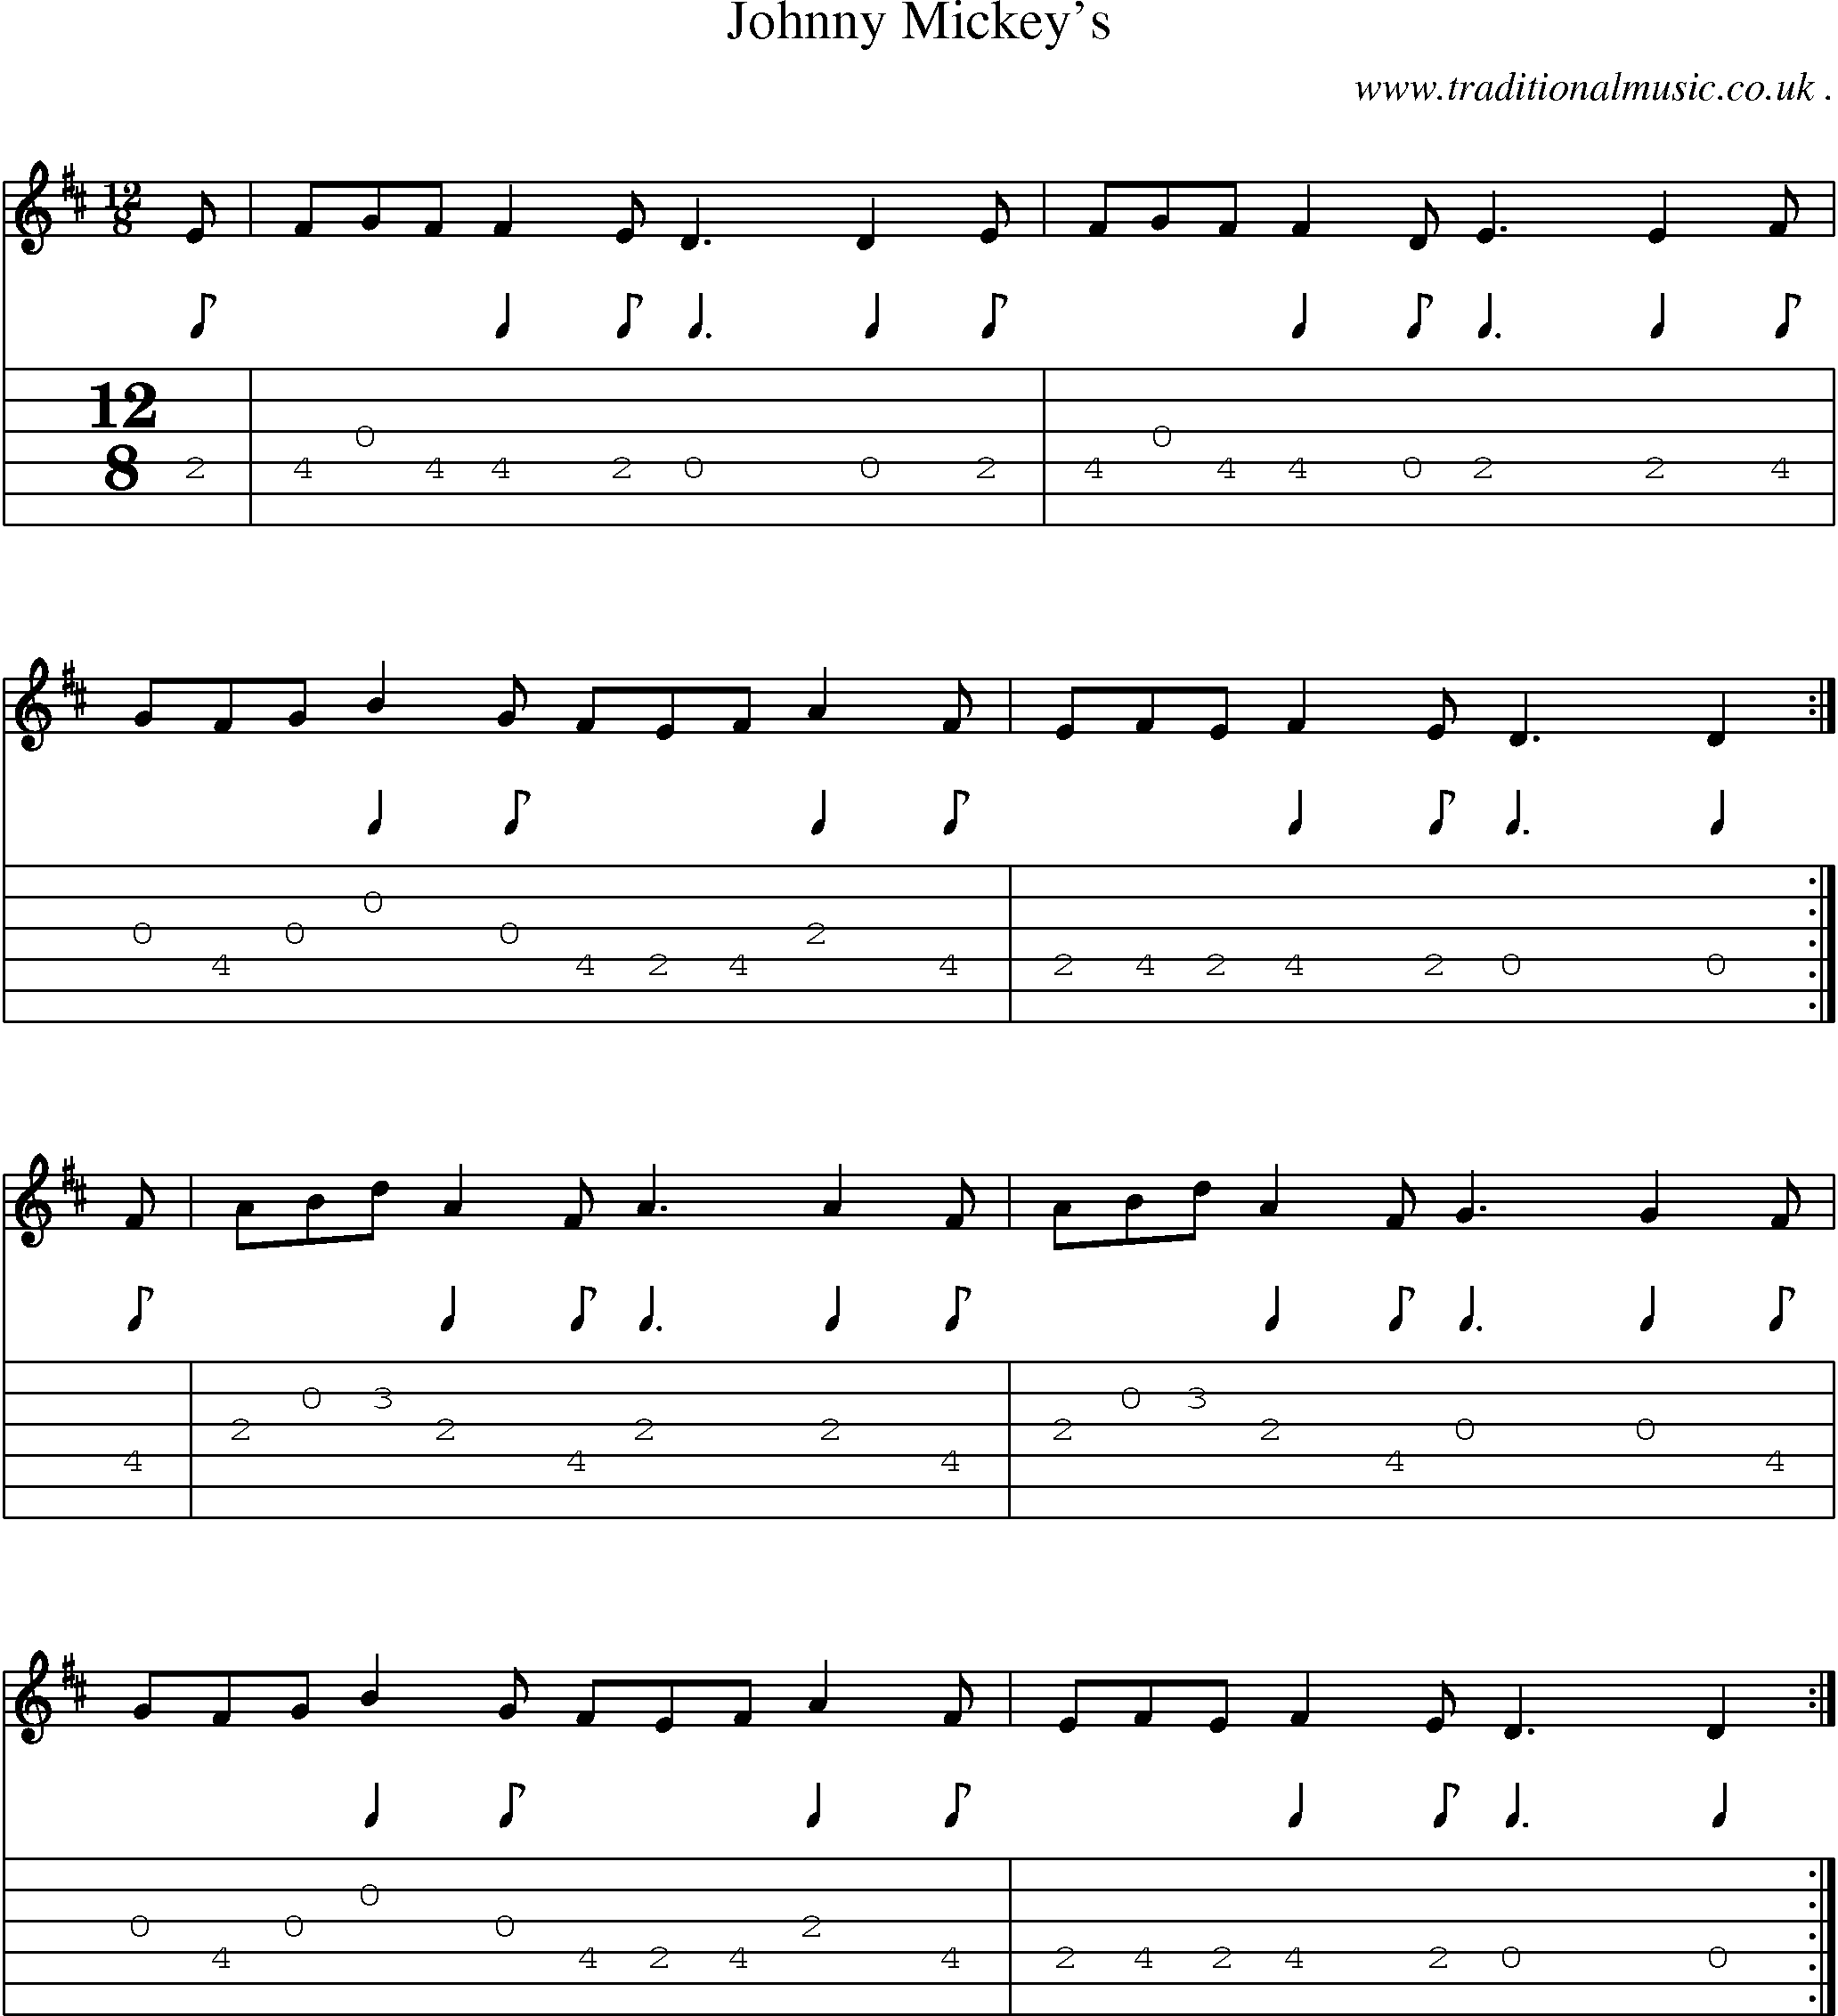 Sheet-Music and Guitar Tabs for Johnny Mickeys